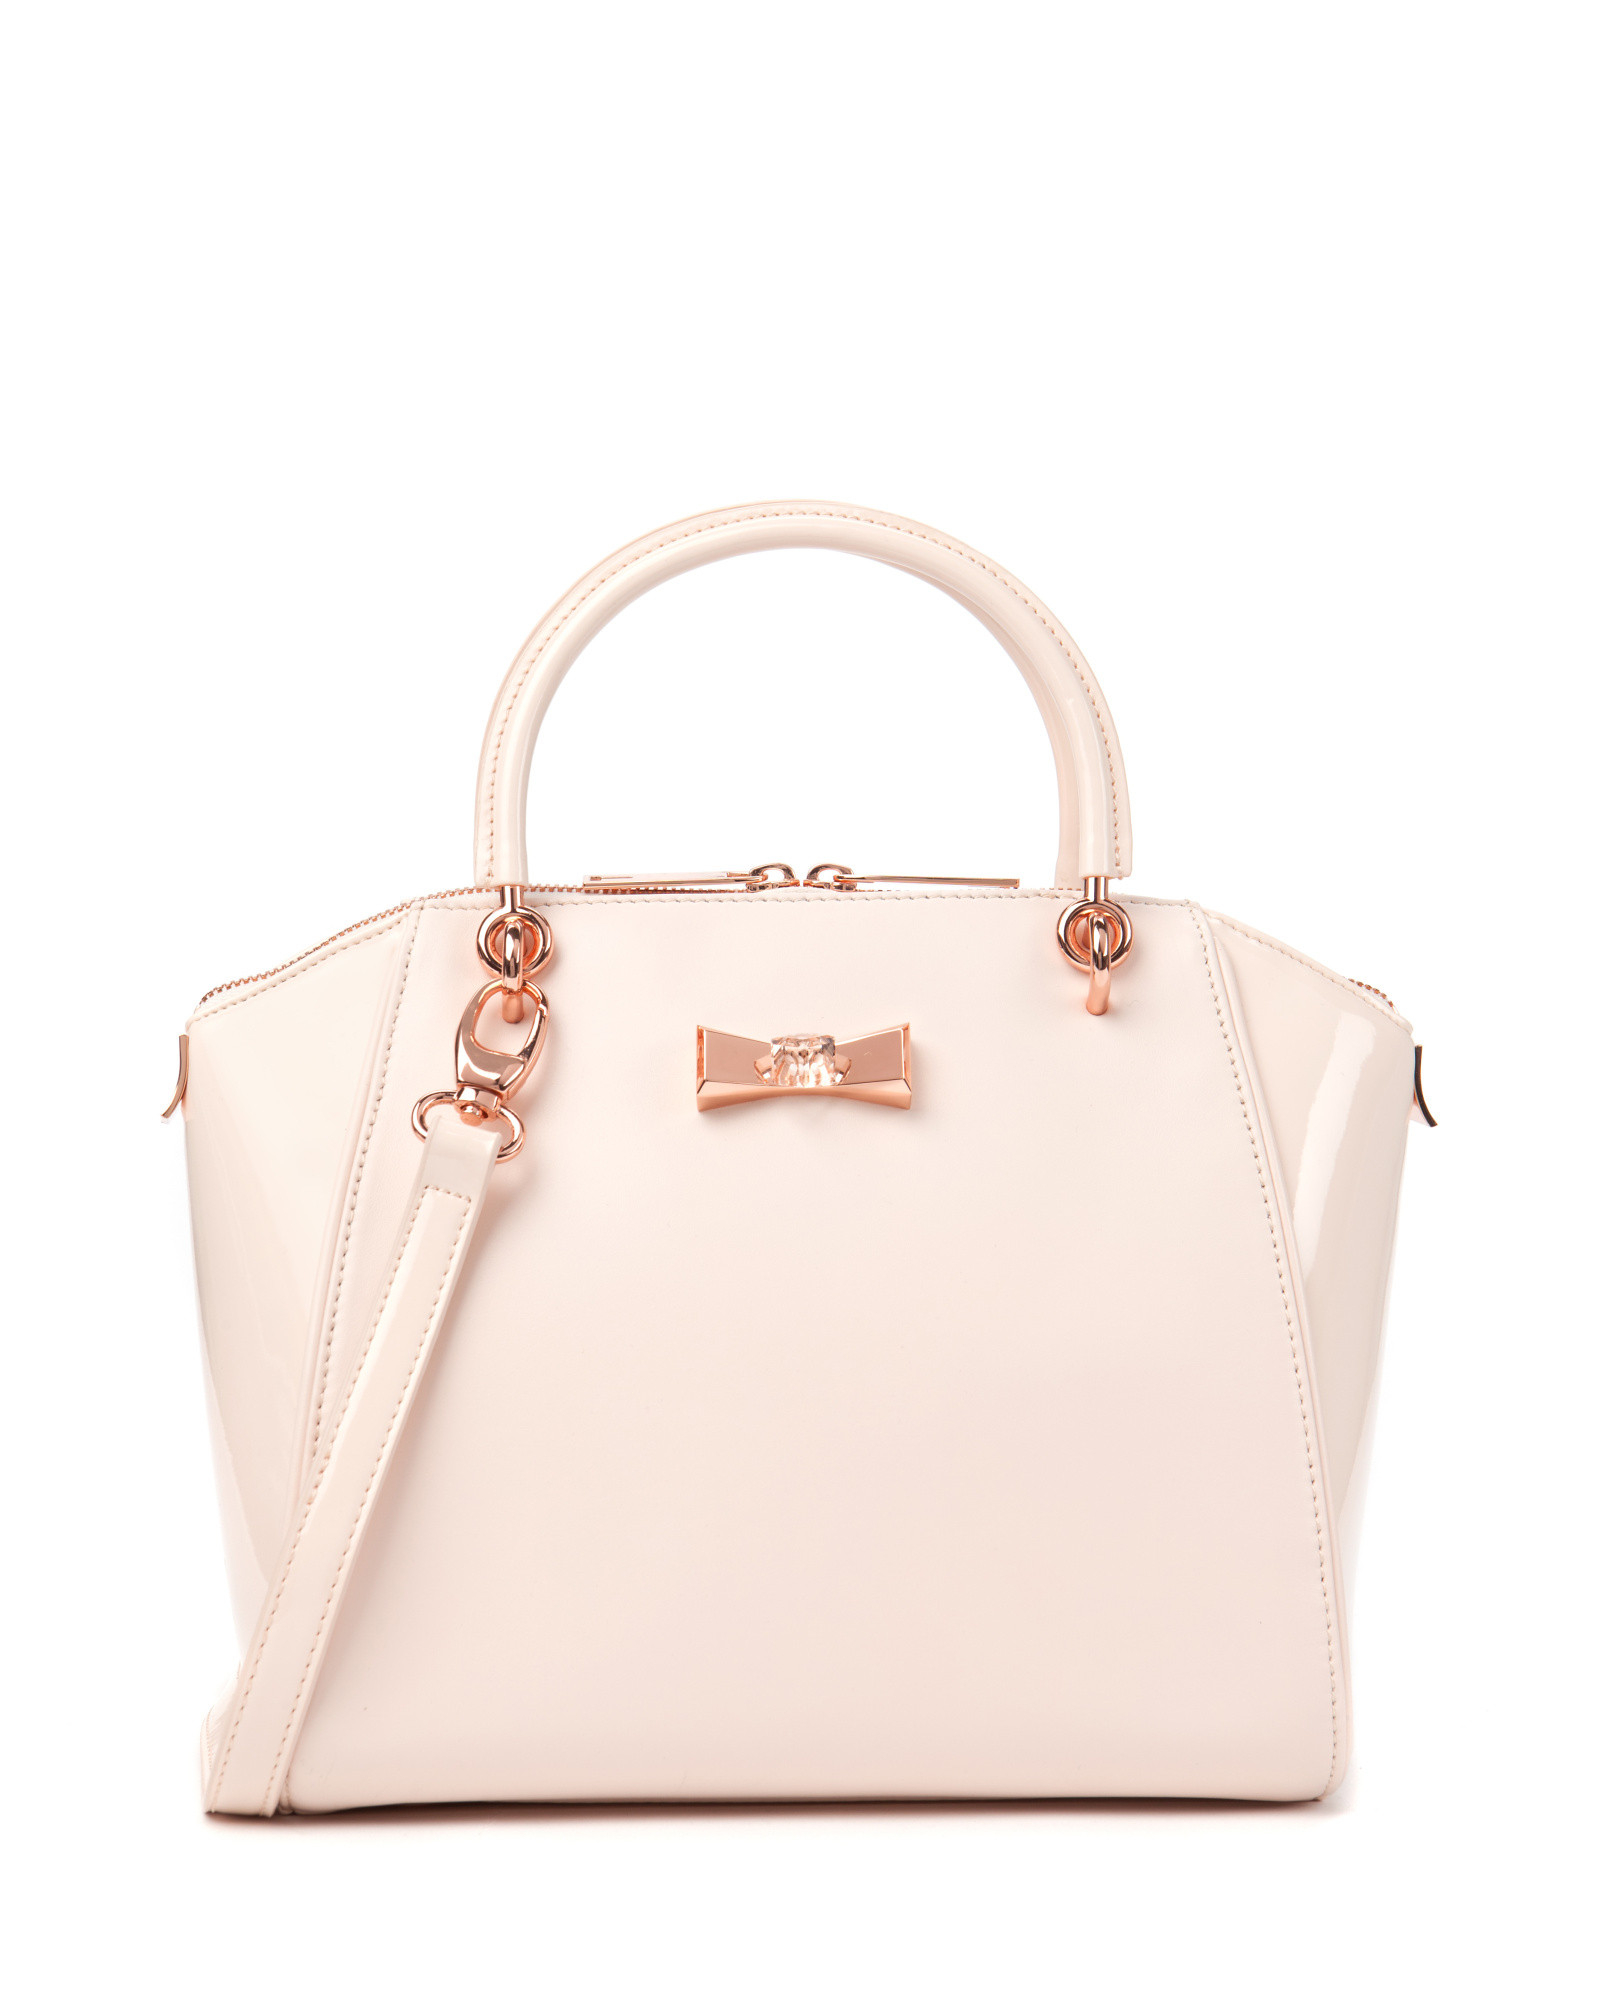 Lyst - Ted Baker Small Crystal Bow Tote in Natural